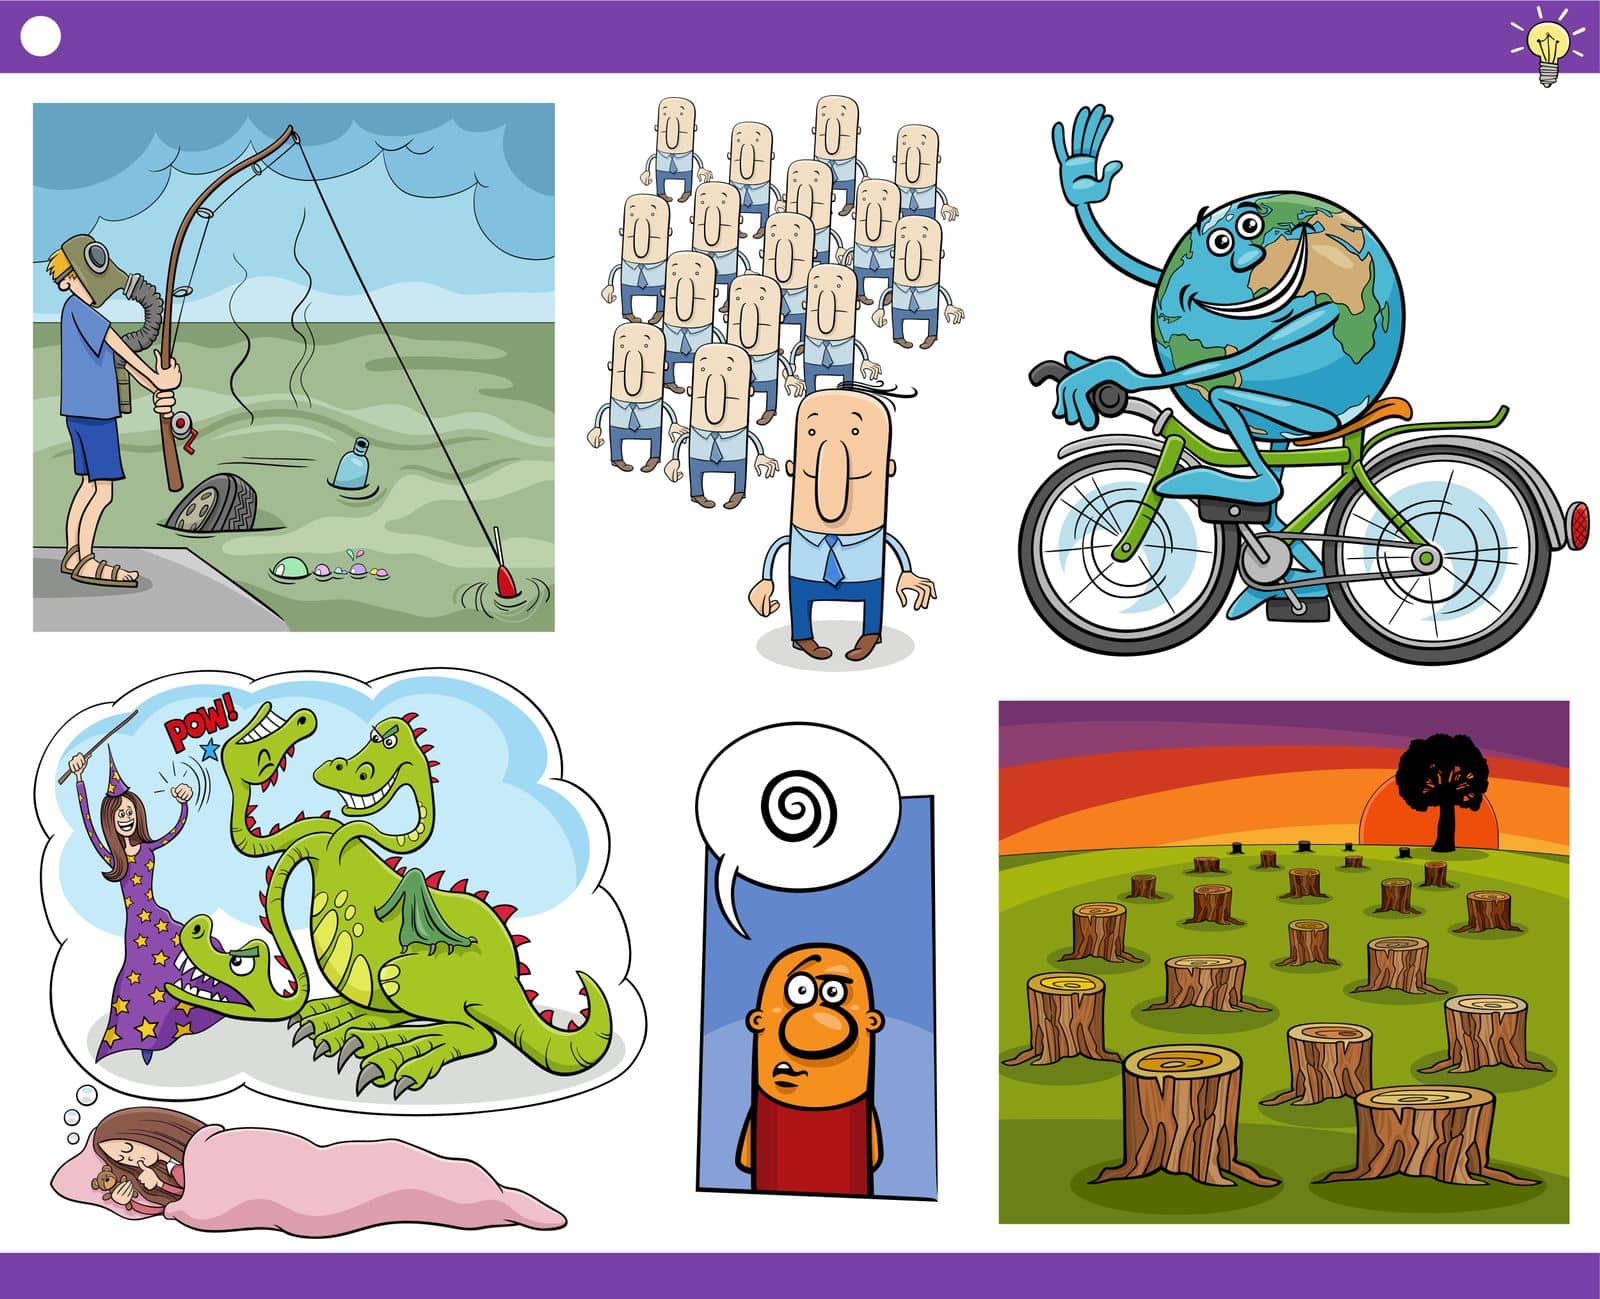 Illustration set of humorous cartoon concepts or metaphors with comic characters